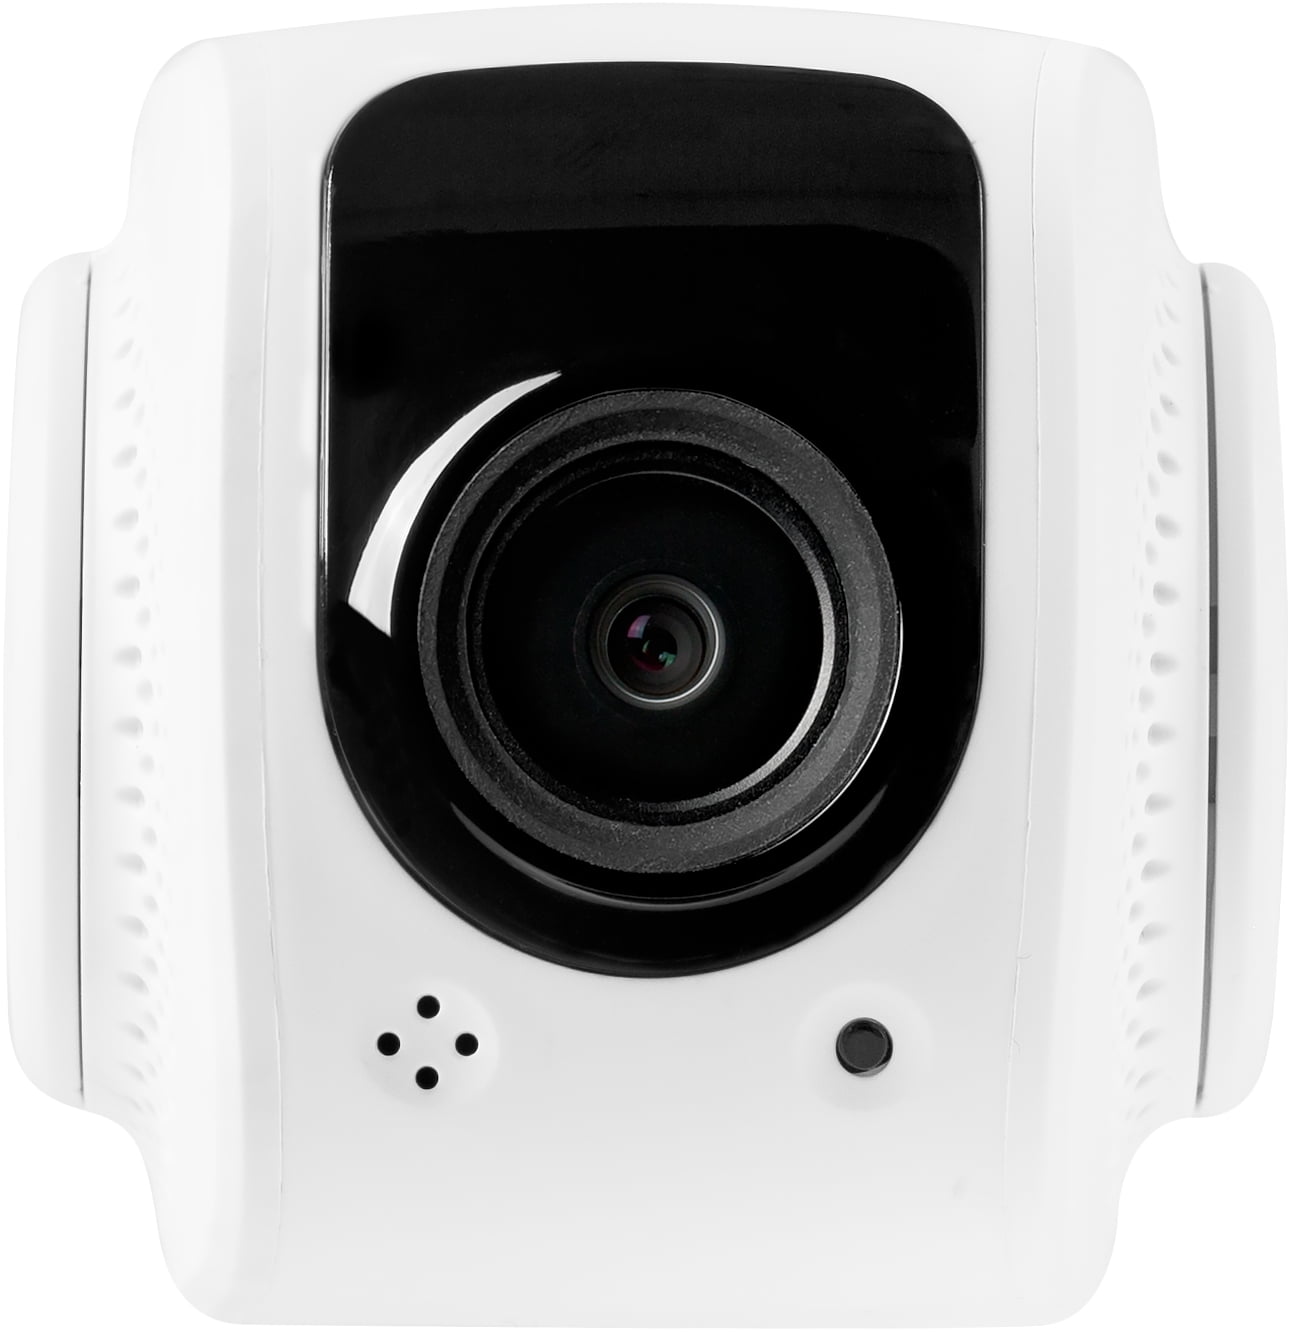 Tend Secure Lynx Indoor HD Wi-Fi Video Monitoring Security Camera with Facial Recognition (White)